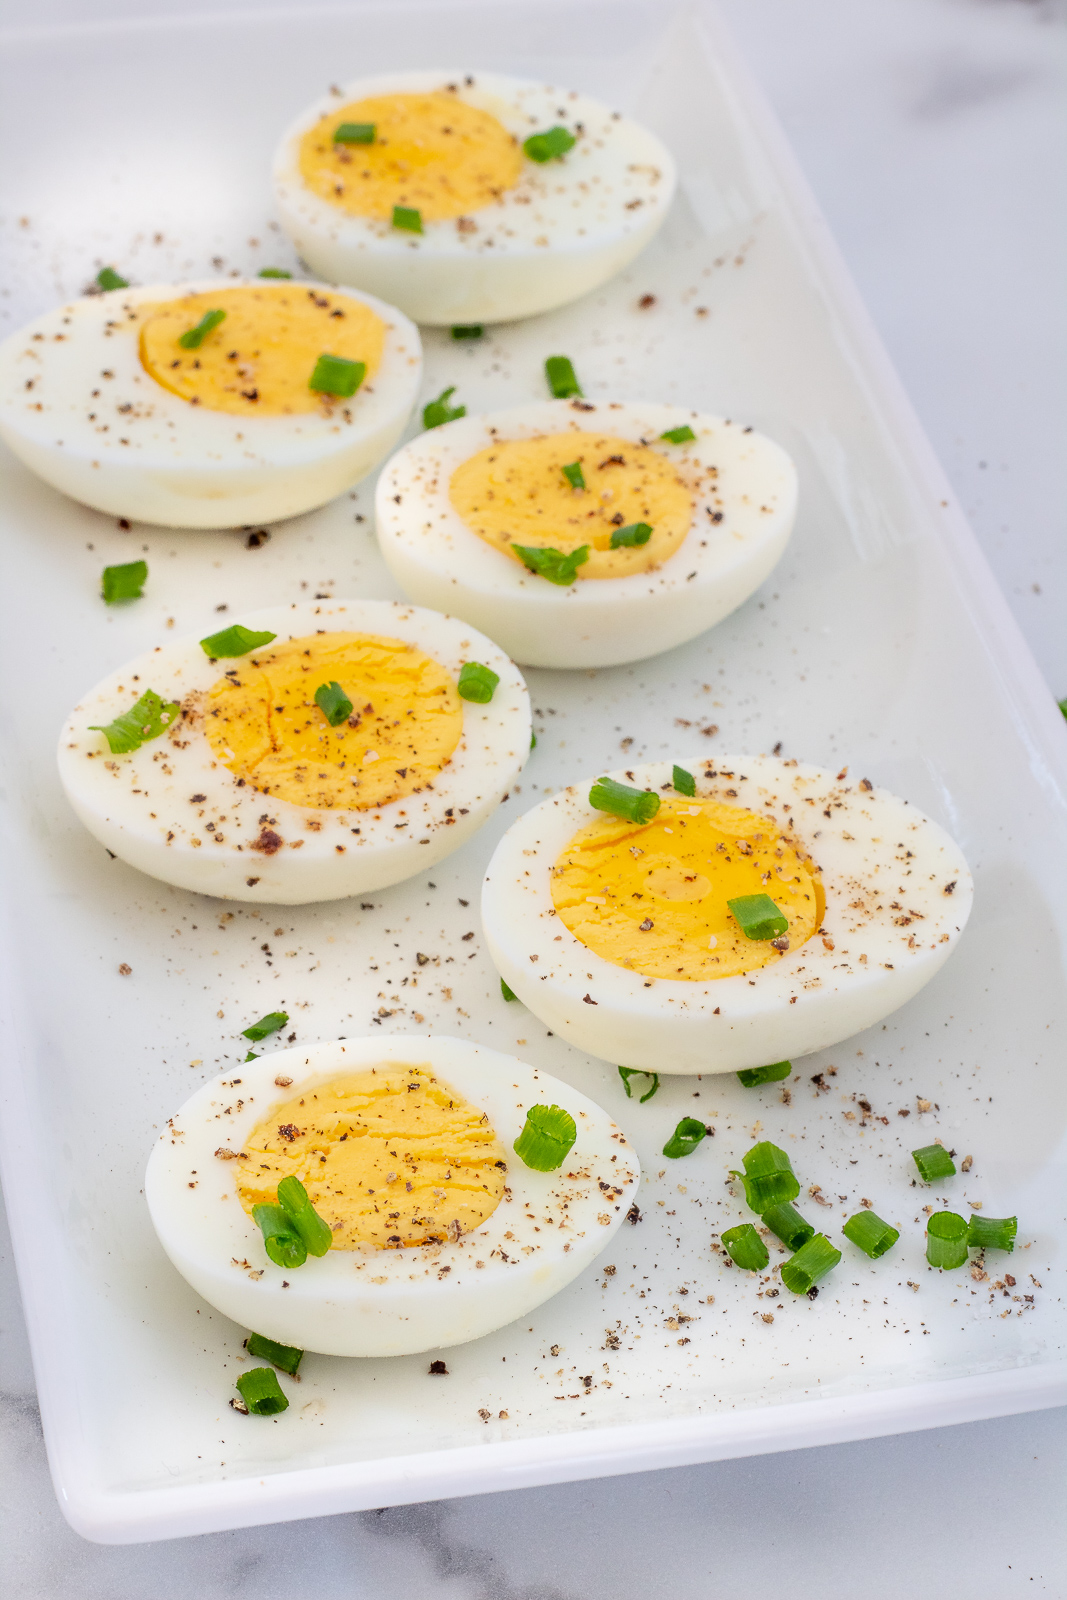 How to make perfect hard boiled eggs the easy way